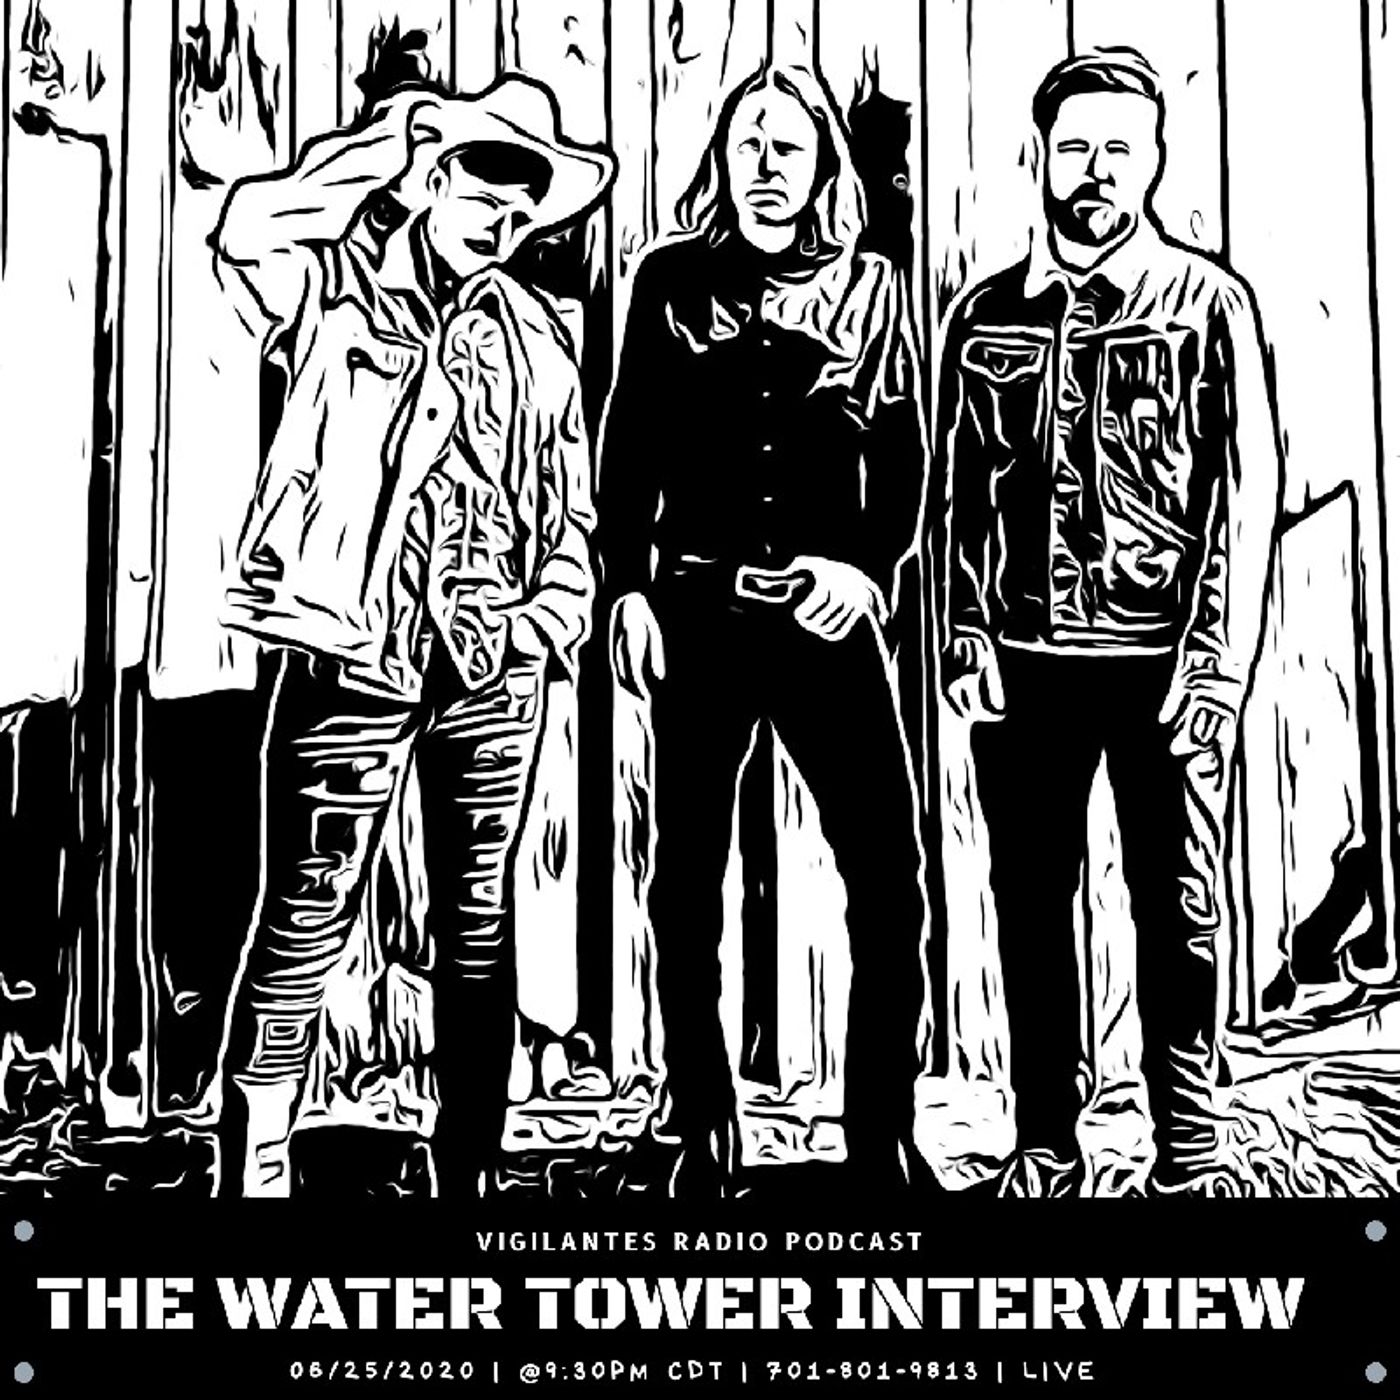 The Water Tower Interview. Image